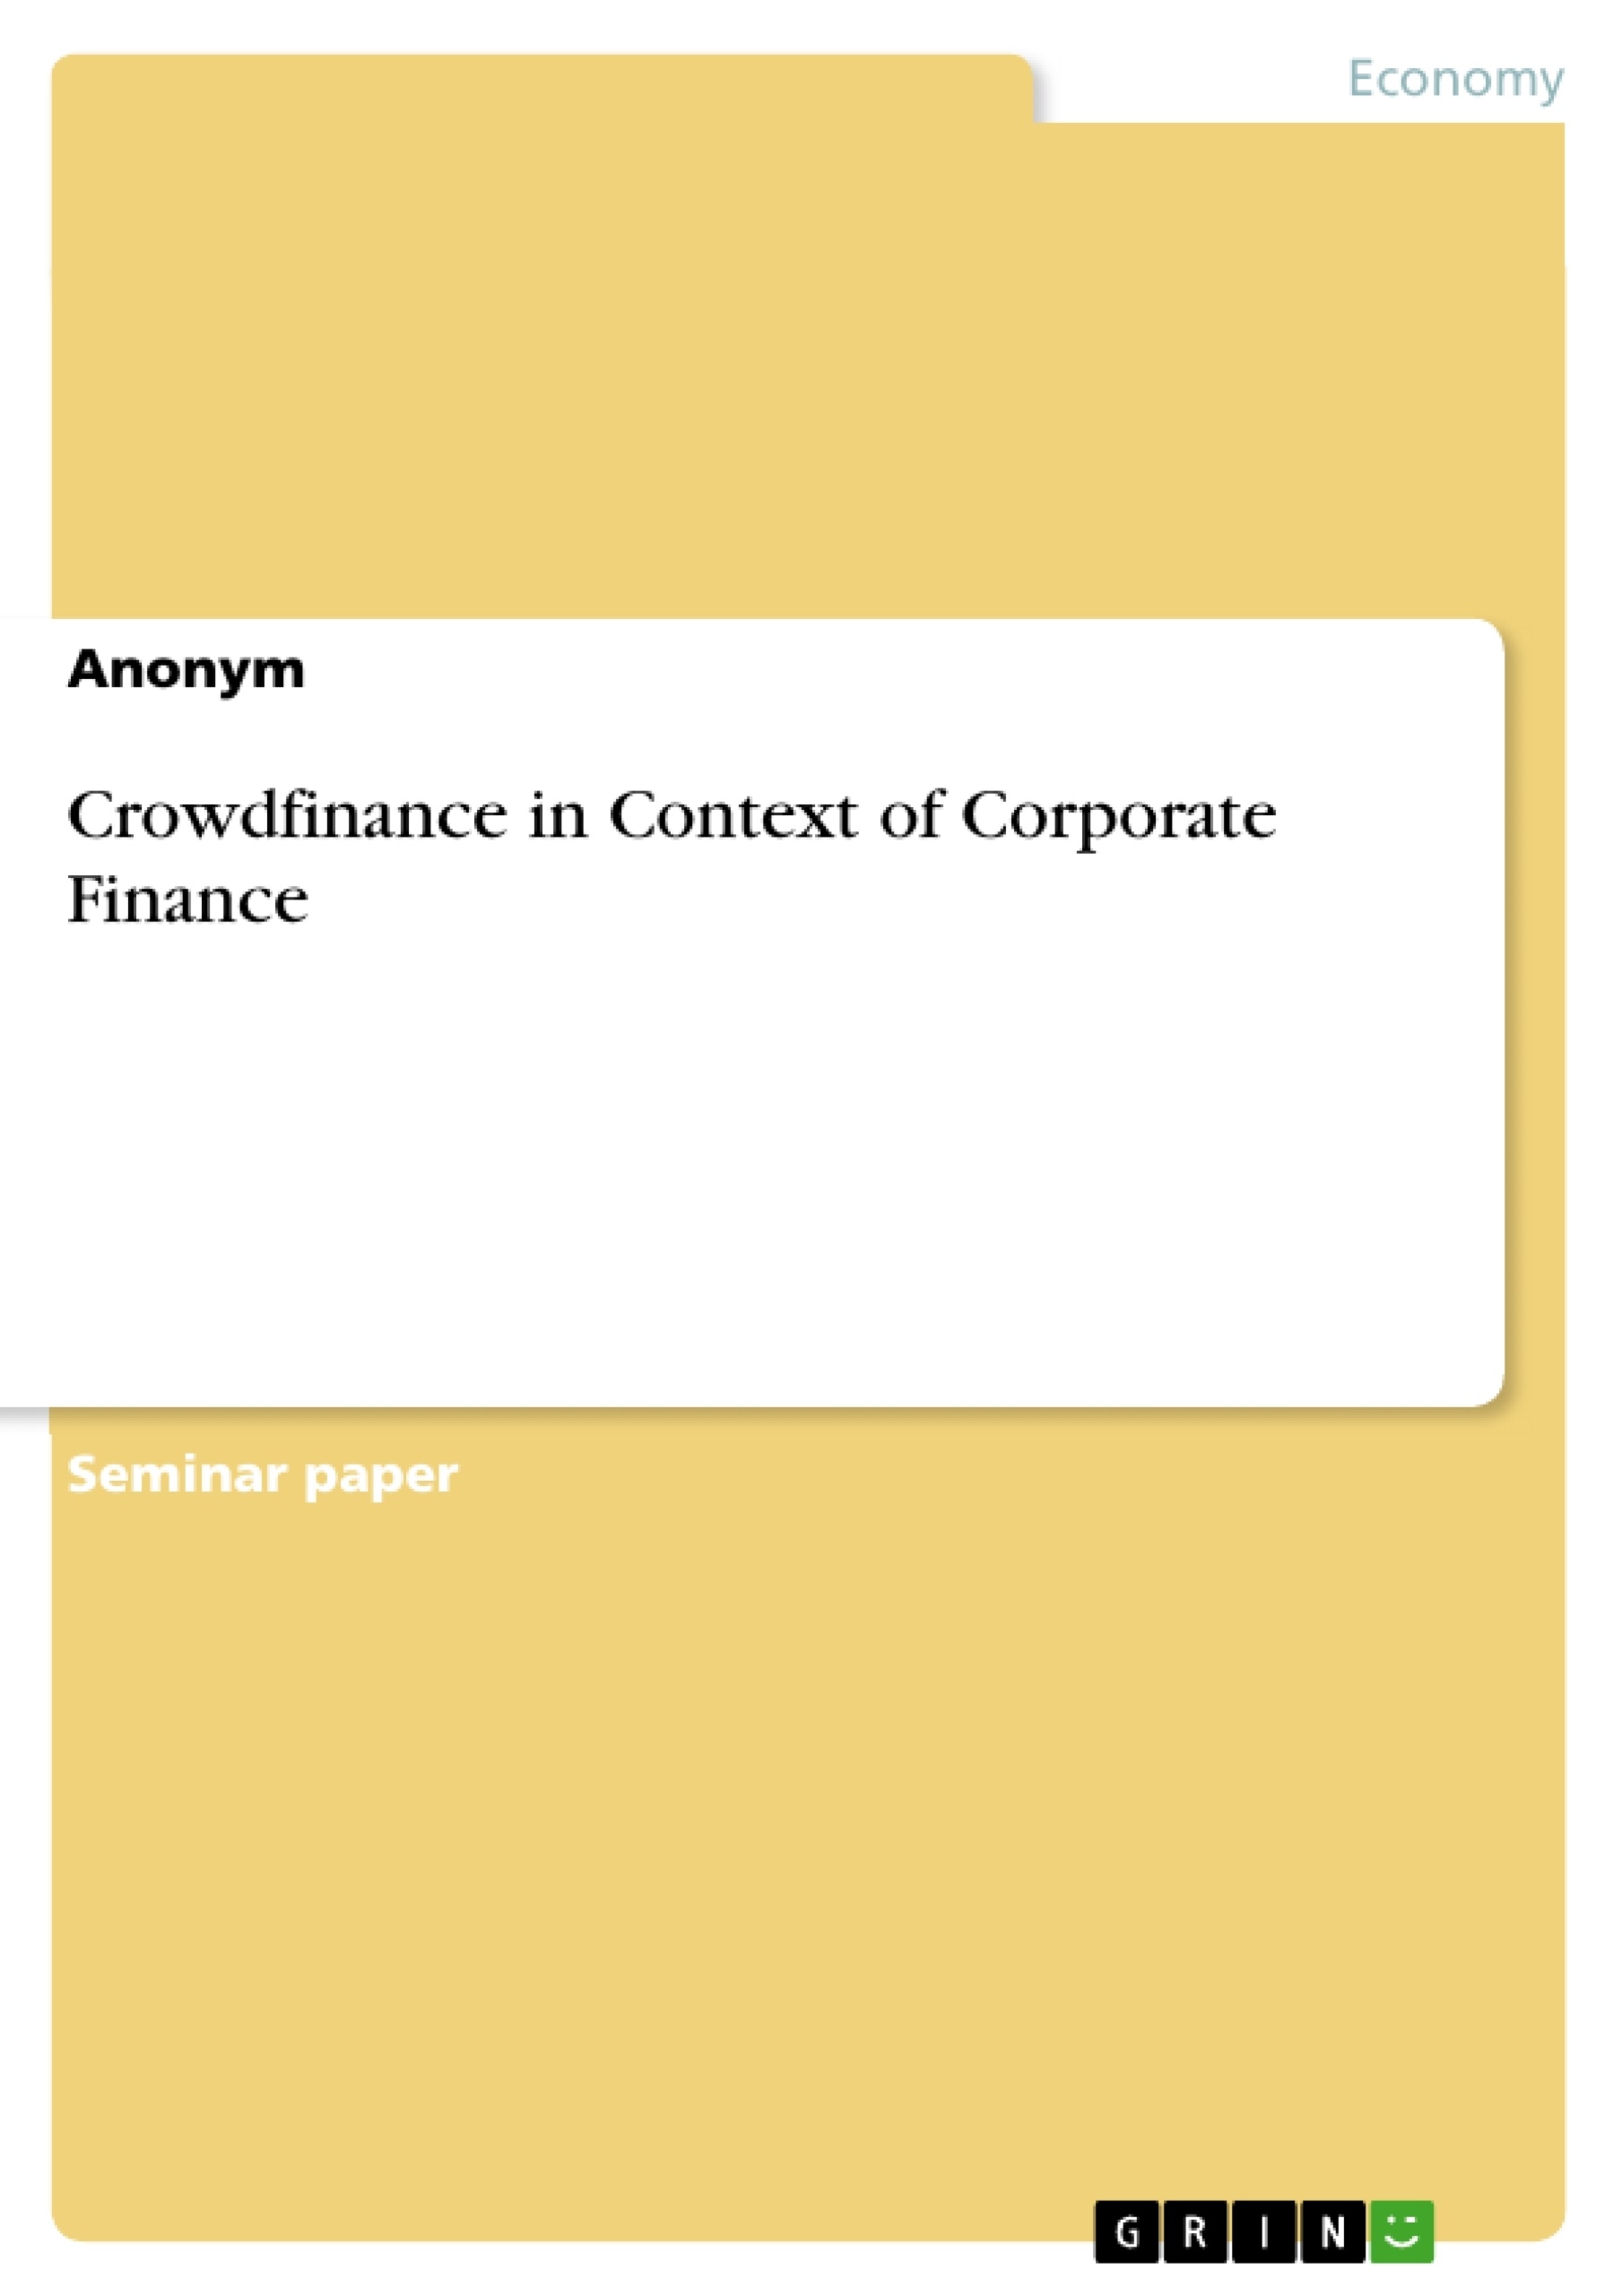 Title: Crowdfinance in Context of Corporate Finance